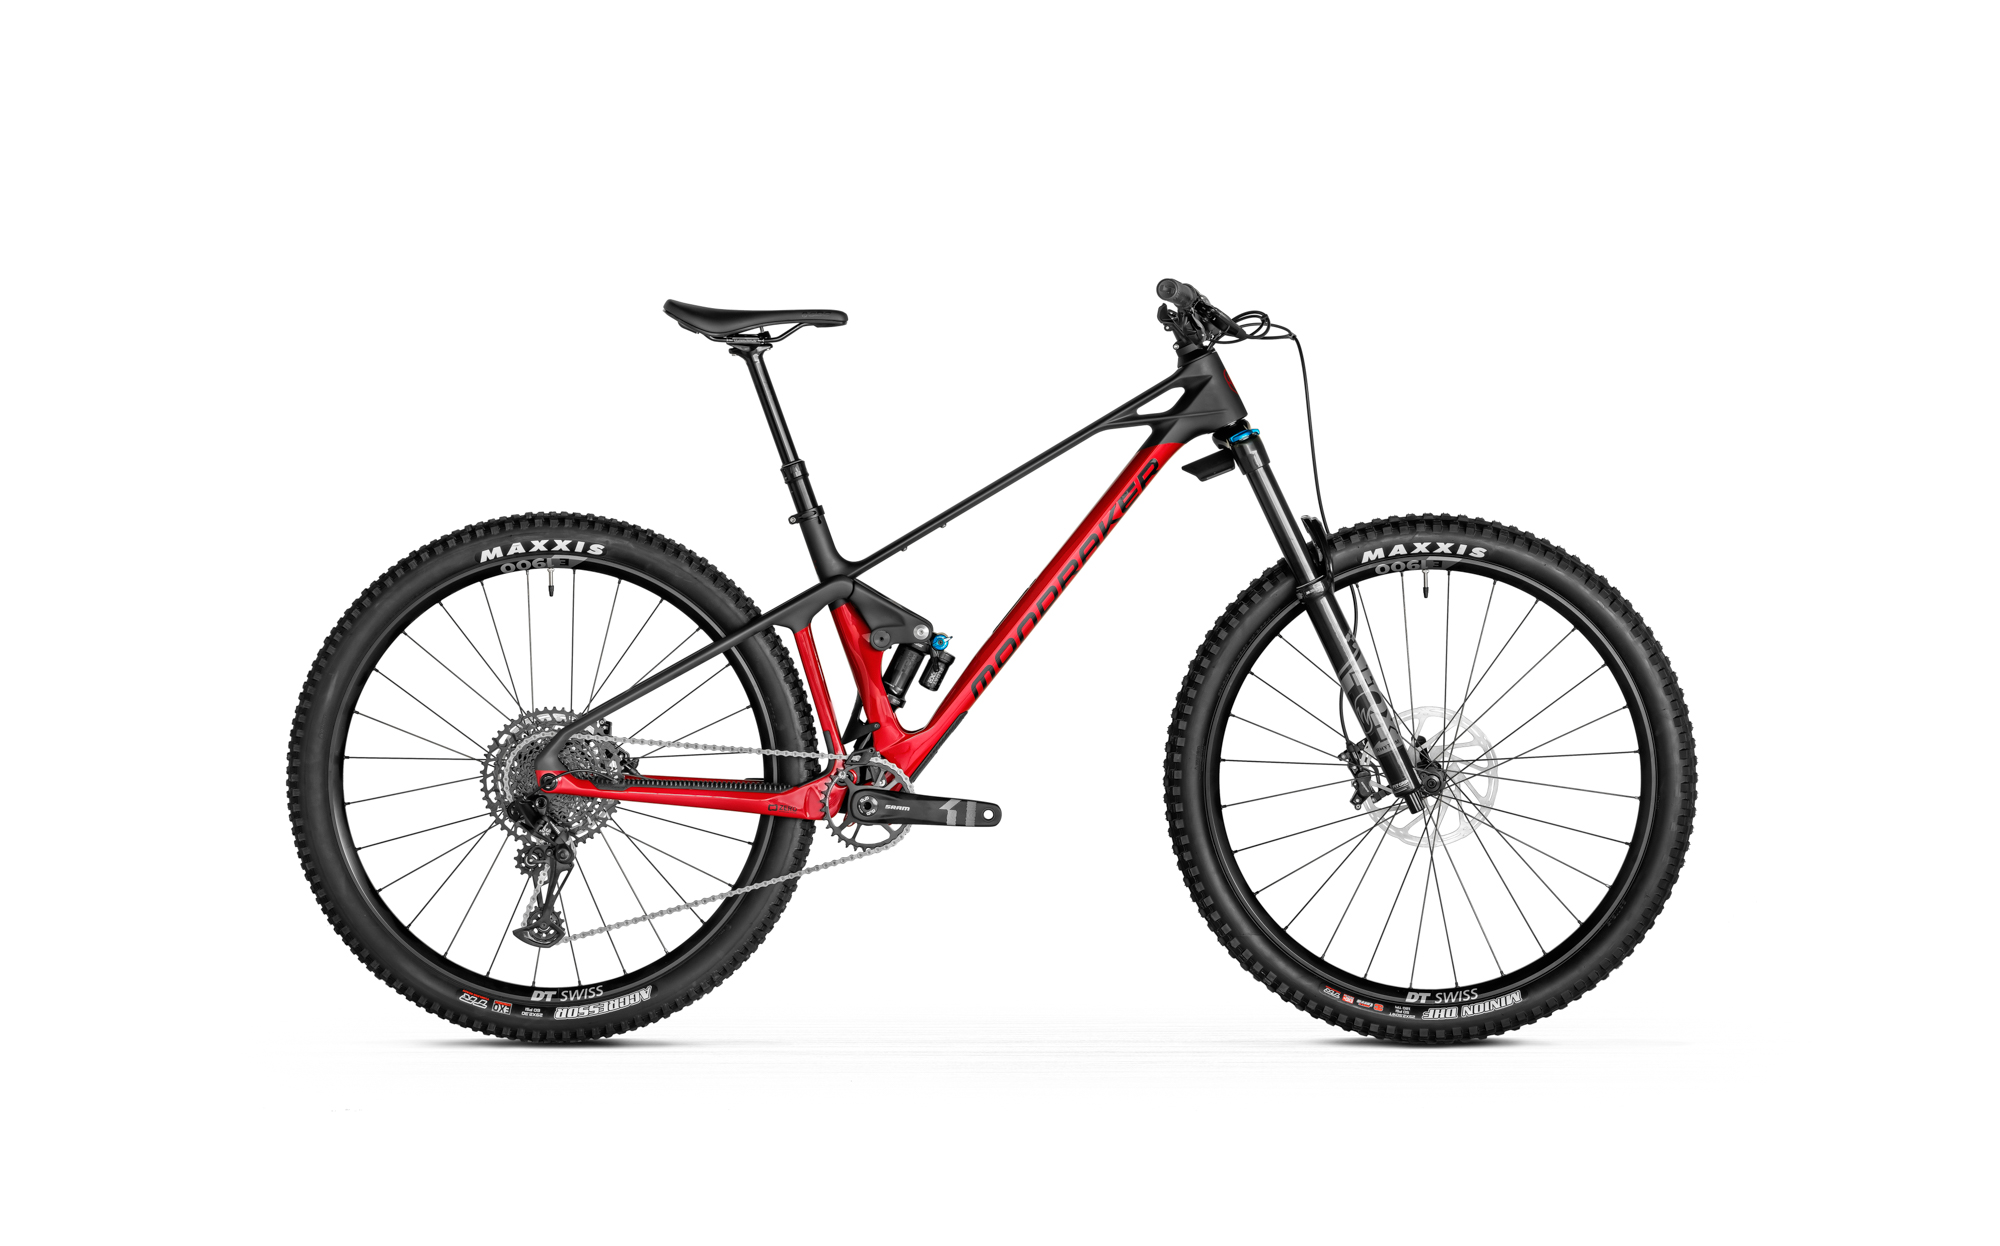 Foxy Carbon R 29 MIND, cherry red/carbon, 2022